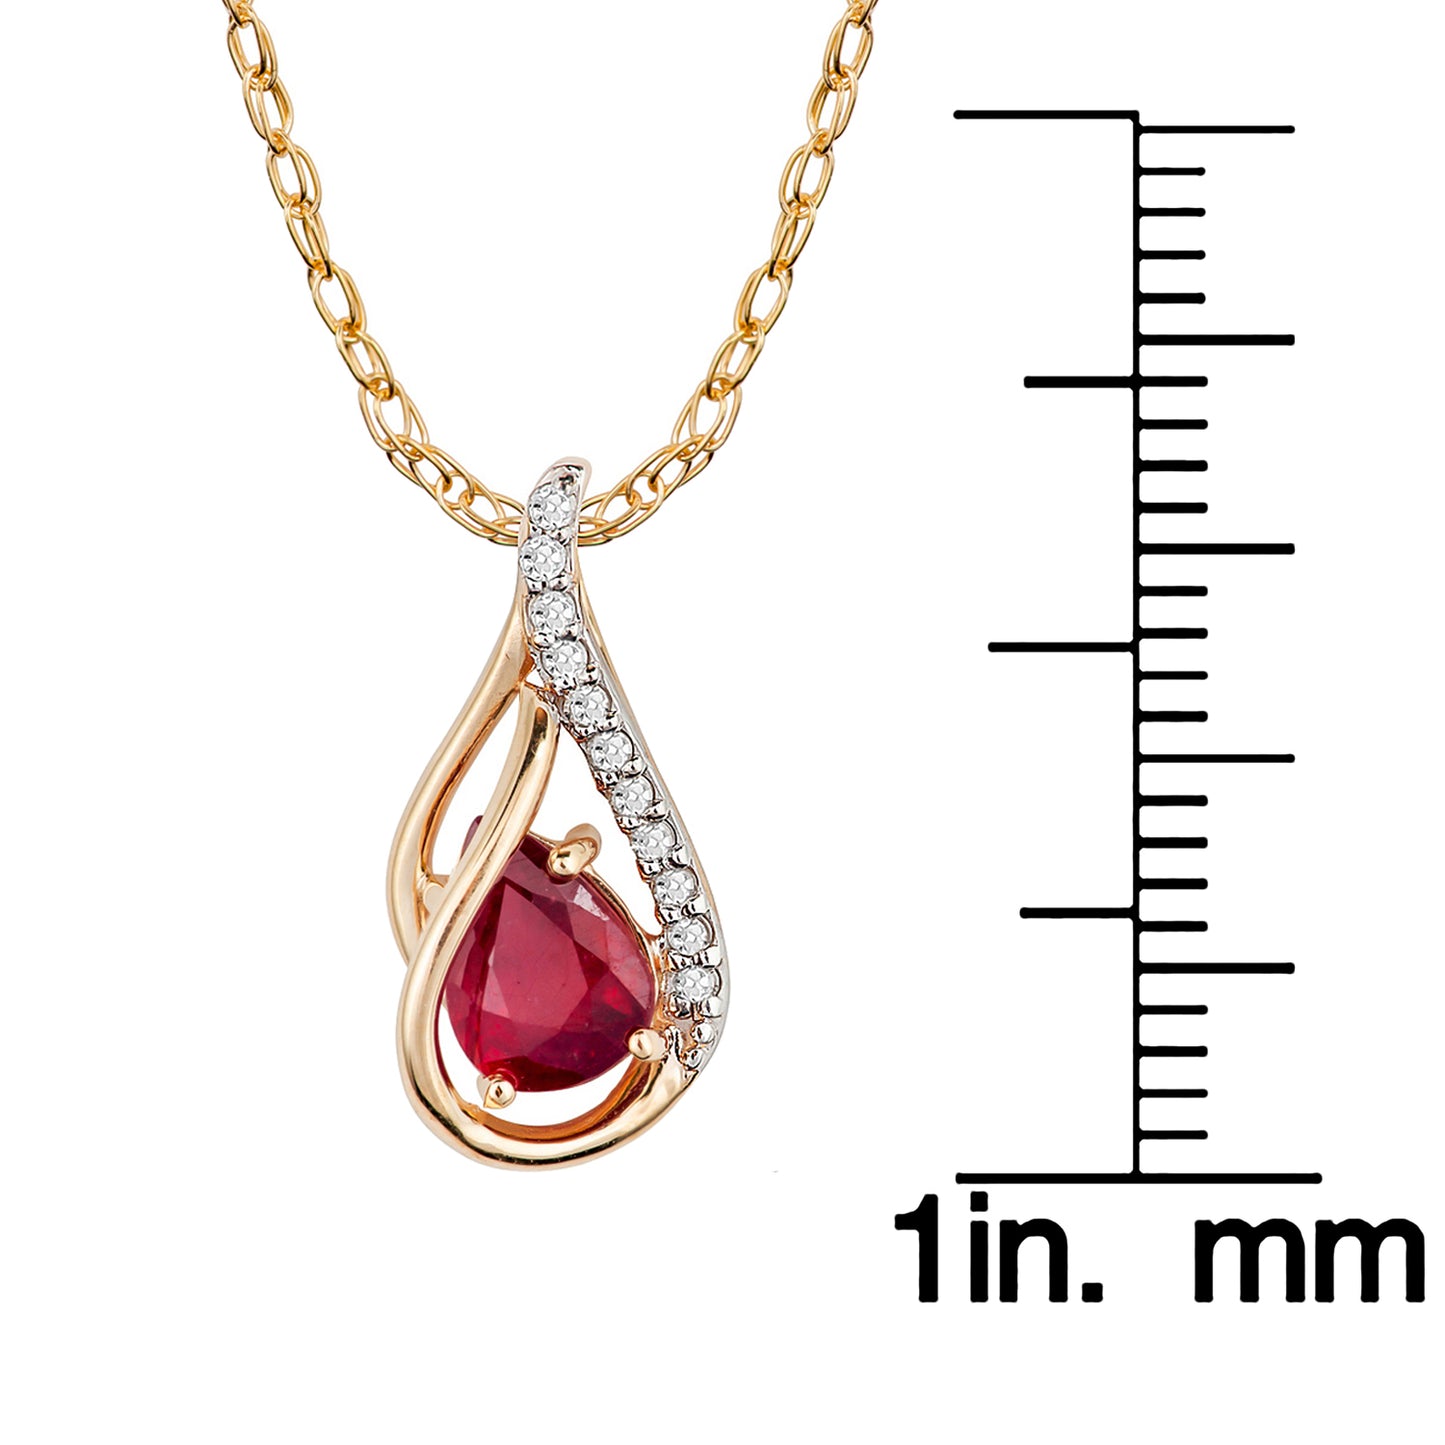 10k Yellow Gold Genuine Pear shape Ruby and Diamond Halo Drop Pendant Necklace